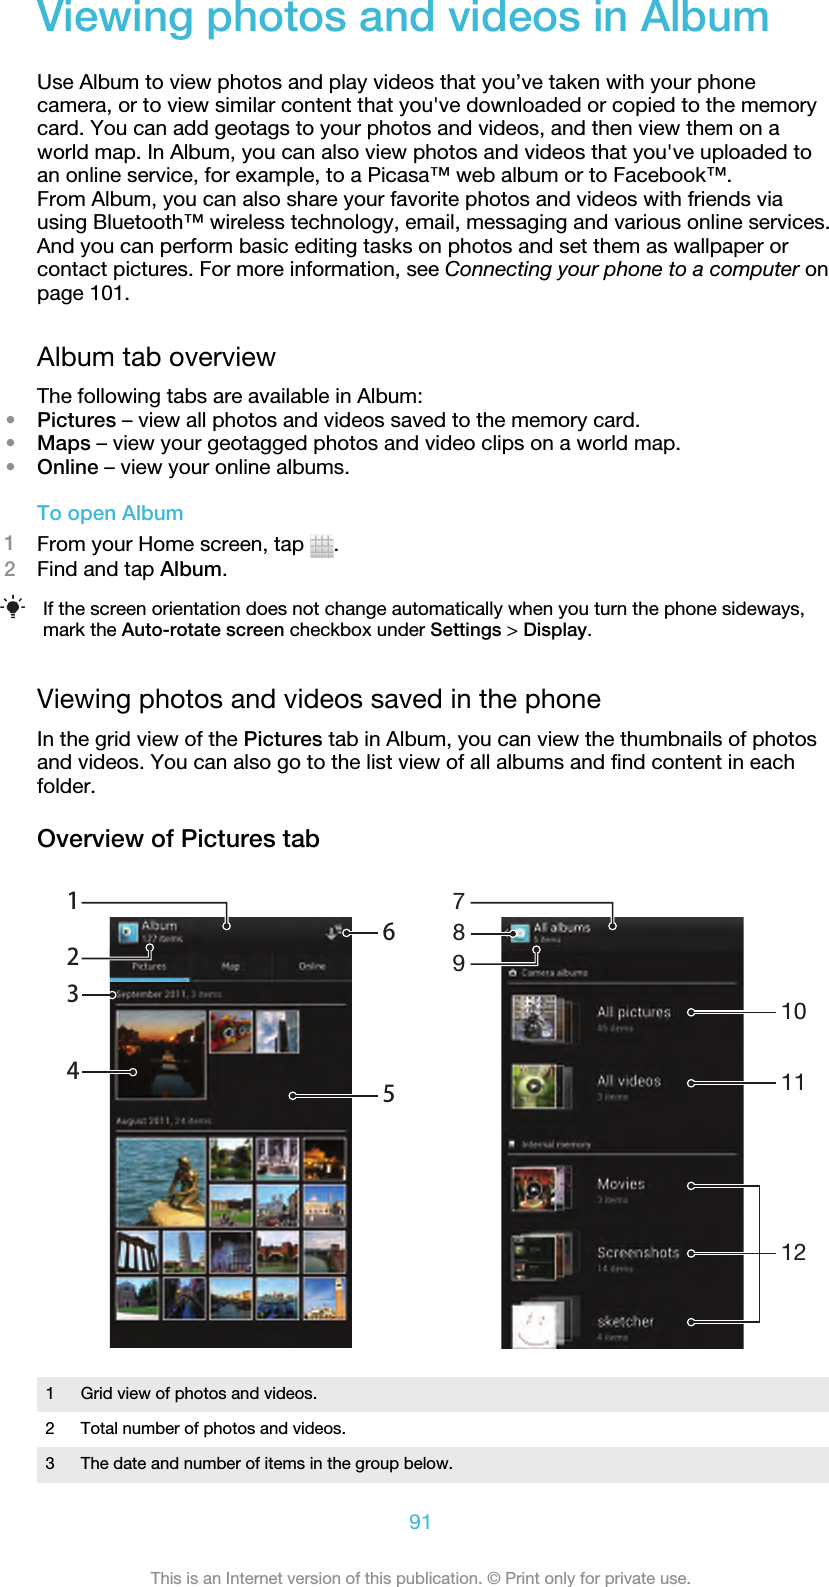 Viewing photos and videos in AlbumUse Album to view photos and play videos that you’ve taken with your phonecamera, or to view similar content that you&apos;ve downloaded or copied to the memorycard. You can add geotags to your photos and videos, and then view them on aworld map. In Album, you can also view photos and videos that you&apos;ve uploaded toan online service, for example, to a Picasa™ web album or to Facebook™.From Album, you can also share your favorite photos and videos with friends viausing Bluetooth™ wireless technology, email, messaging and various online services.And you can perform basic editing tasks on photos and set them as wallpaper orcontact pictures. For more information, see Connecting your phone to a computer onpage 101.Album tab overviewThe following tabs are available in Album:•Pictures – view all photos and videos saved to the memory card.•Maps – view your geotagged photos and video clips on a world map.•Online – view your online albums.To open Album1From your Home screen, tap  .2Find and tap Album.If the screen orientation does not change automatically when you turn the phone sideways,mark the Auto-rotate screen checkbox under Settings &gt; Display.Viewing photos and videos saved in the phoneIn the grid view of the Pictures tab in Album, you can view the thumbnails of photosand videos. You can also go to the list view of all albums and find content in eachfolder.Overview of Pictures tab6512341011127891Grid view of photos and videos.2 Total number of photos and videos.3 The date and number of items in the group below.91This is an Internet version of this publication. © Print only for private use.